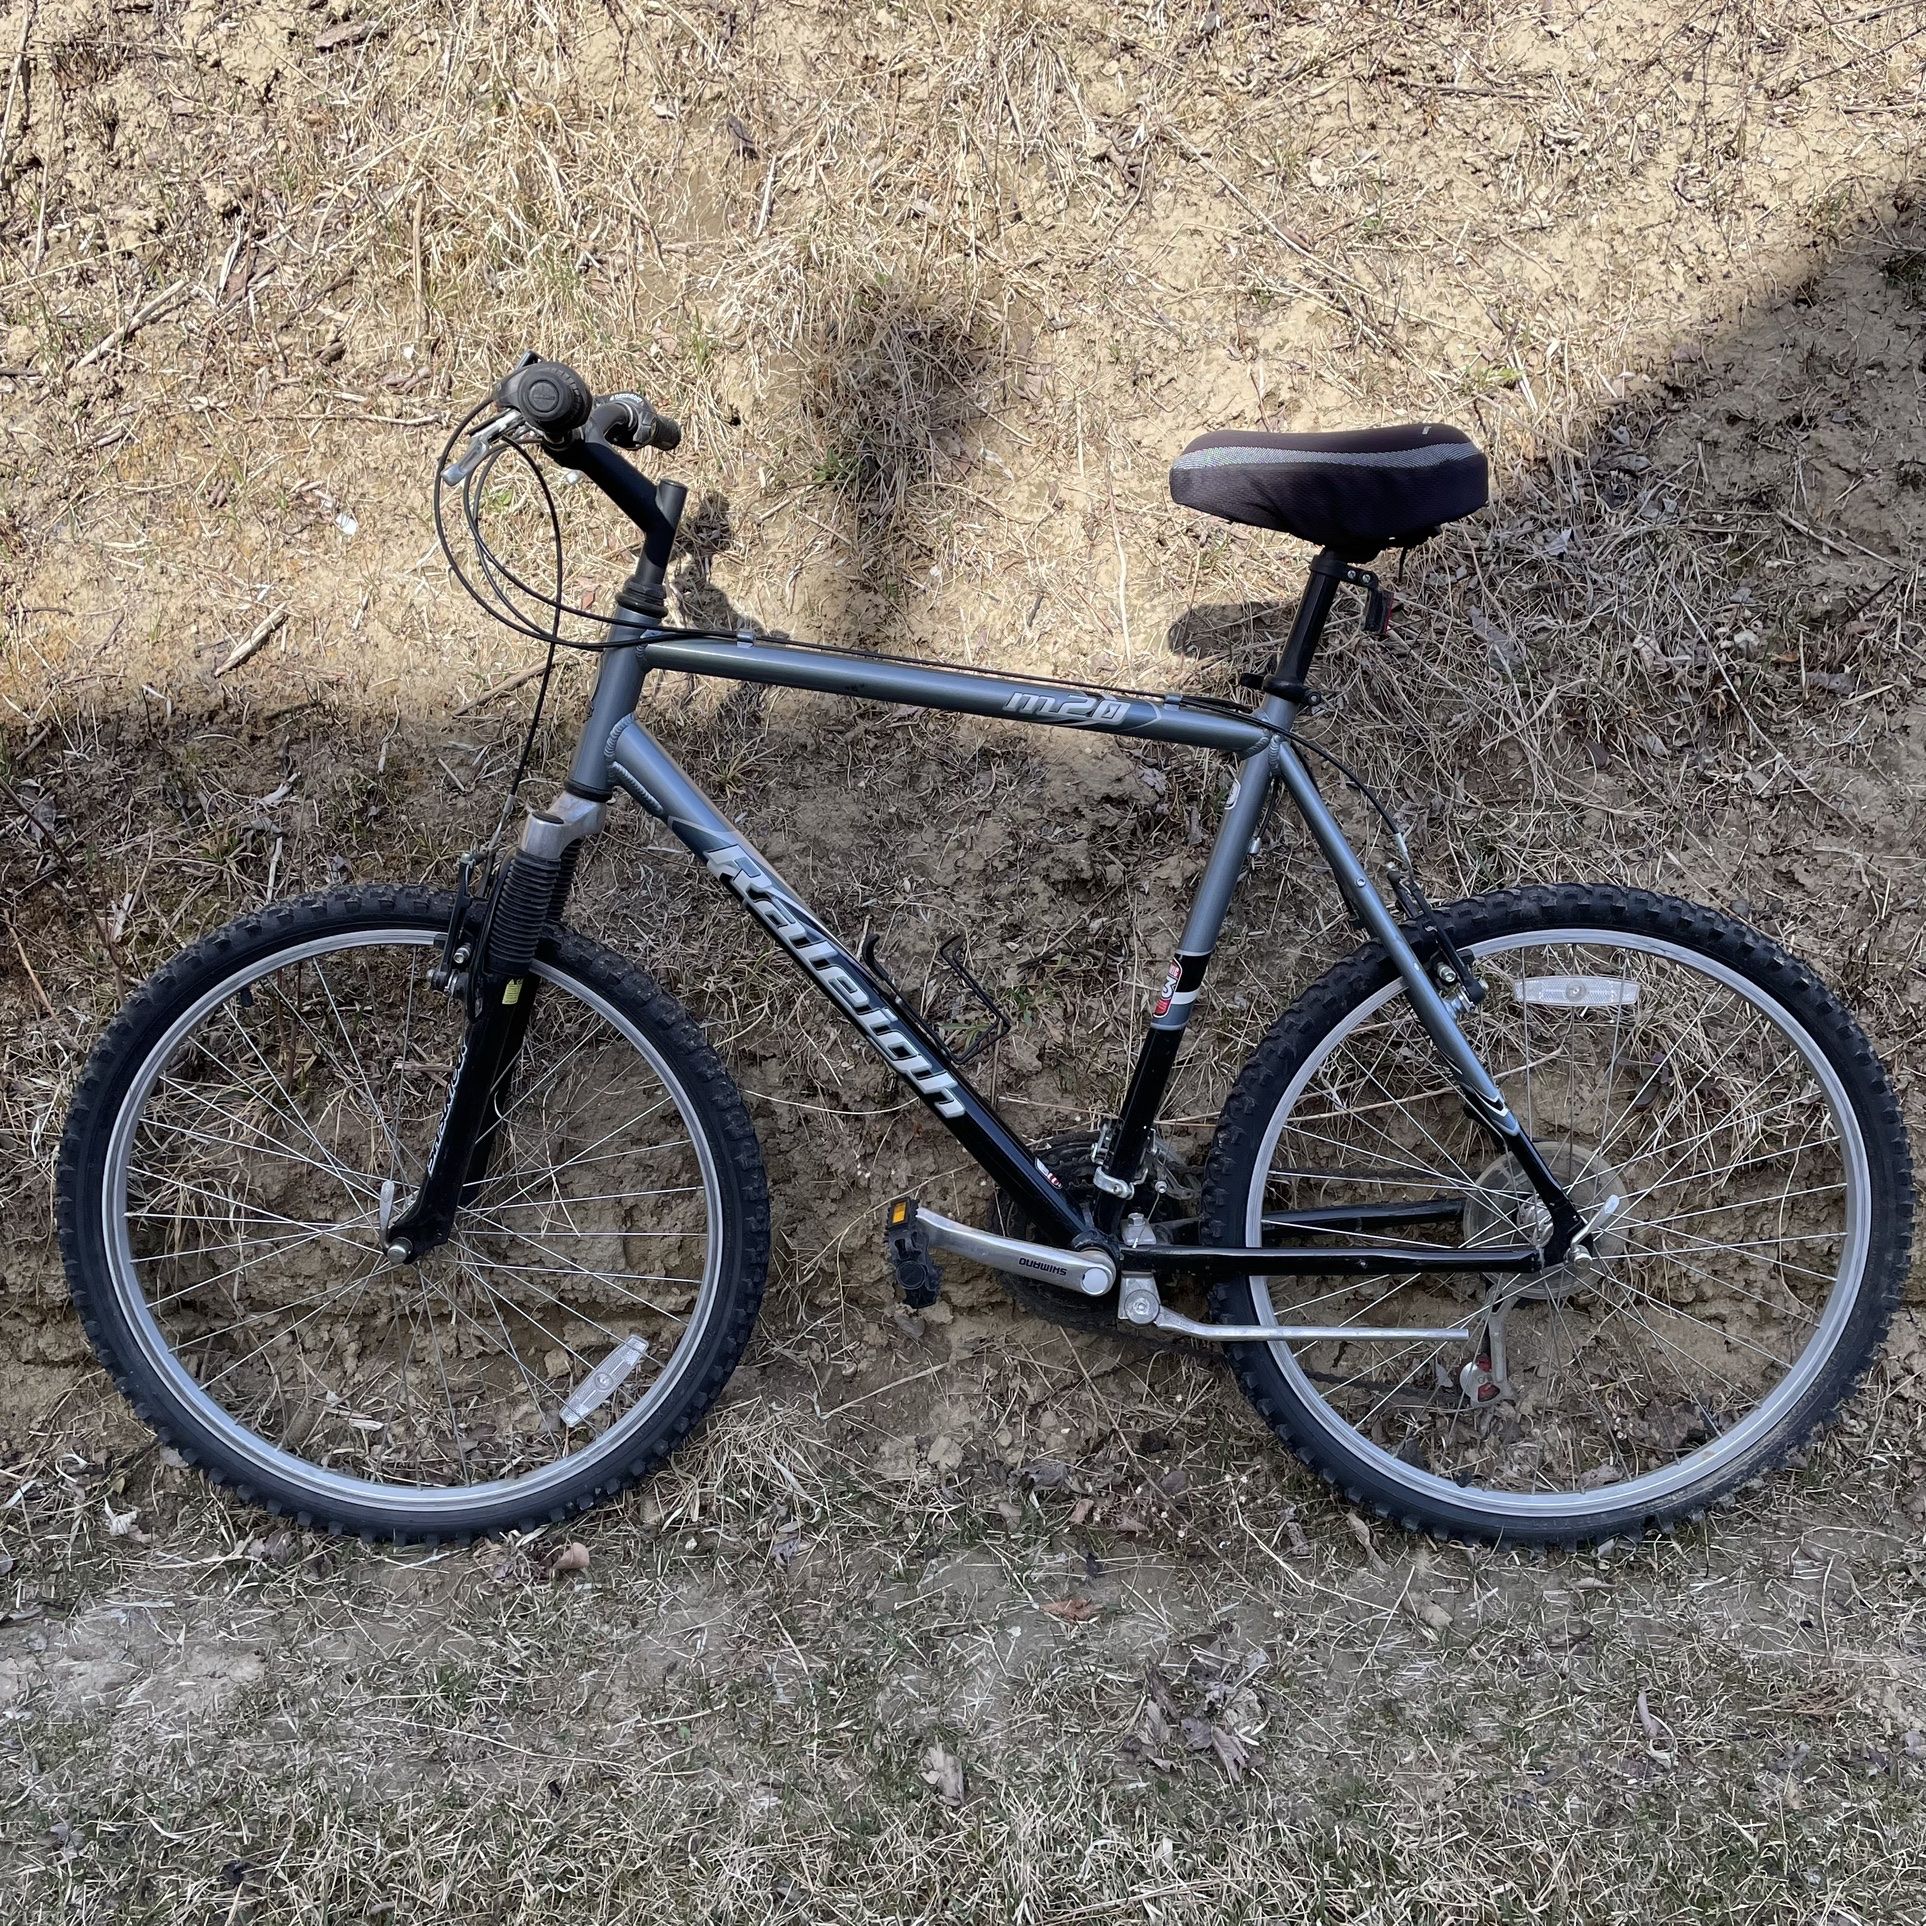 Raleigh M20 Mens Mountain Bike XL 22 for Sale in Council Bluffs, IA - OfferUp